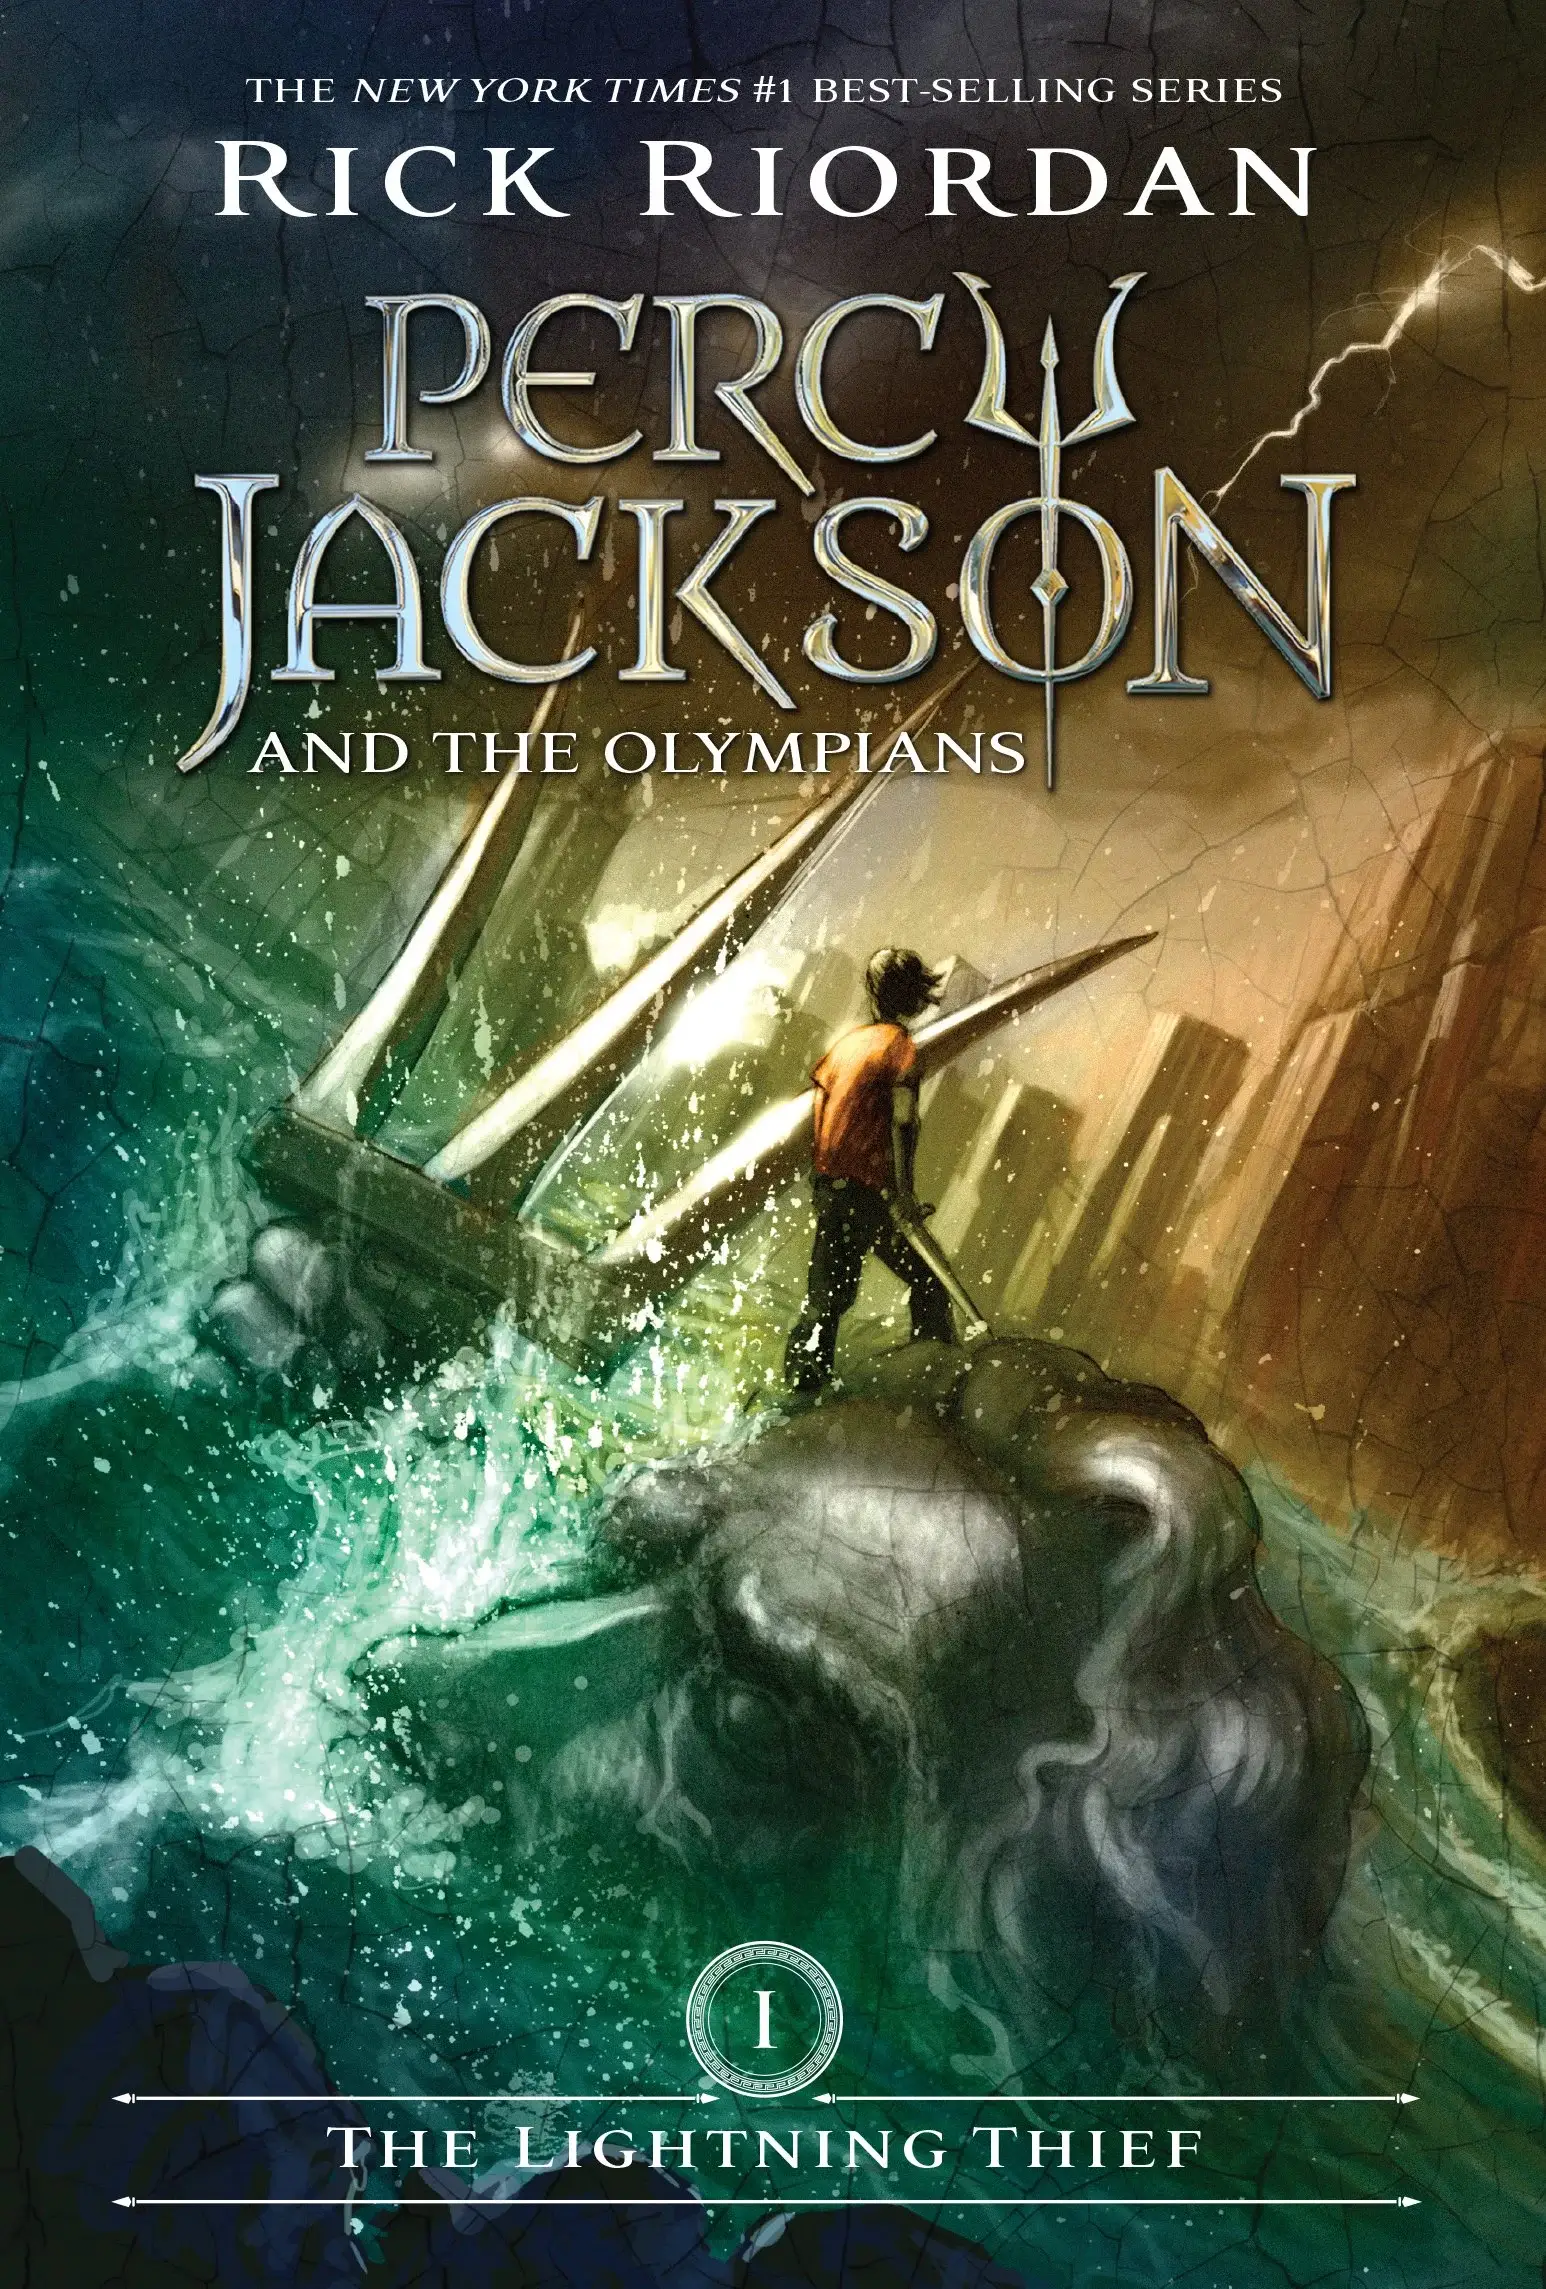 Header / Cover Image for 'Book Review: Percy Jackson'